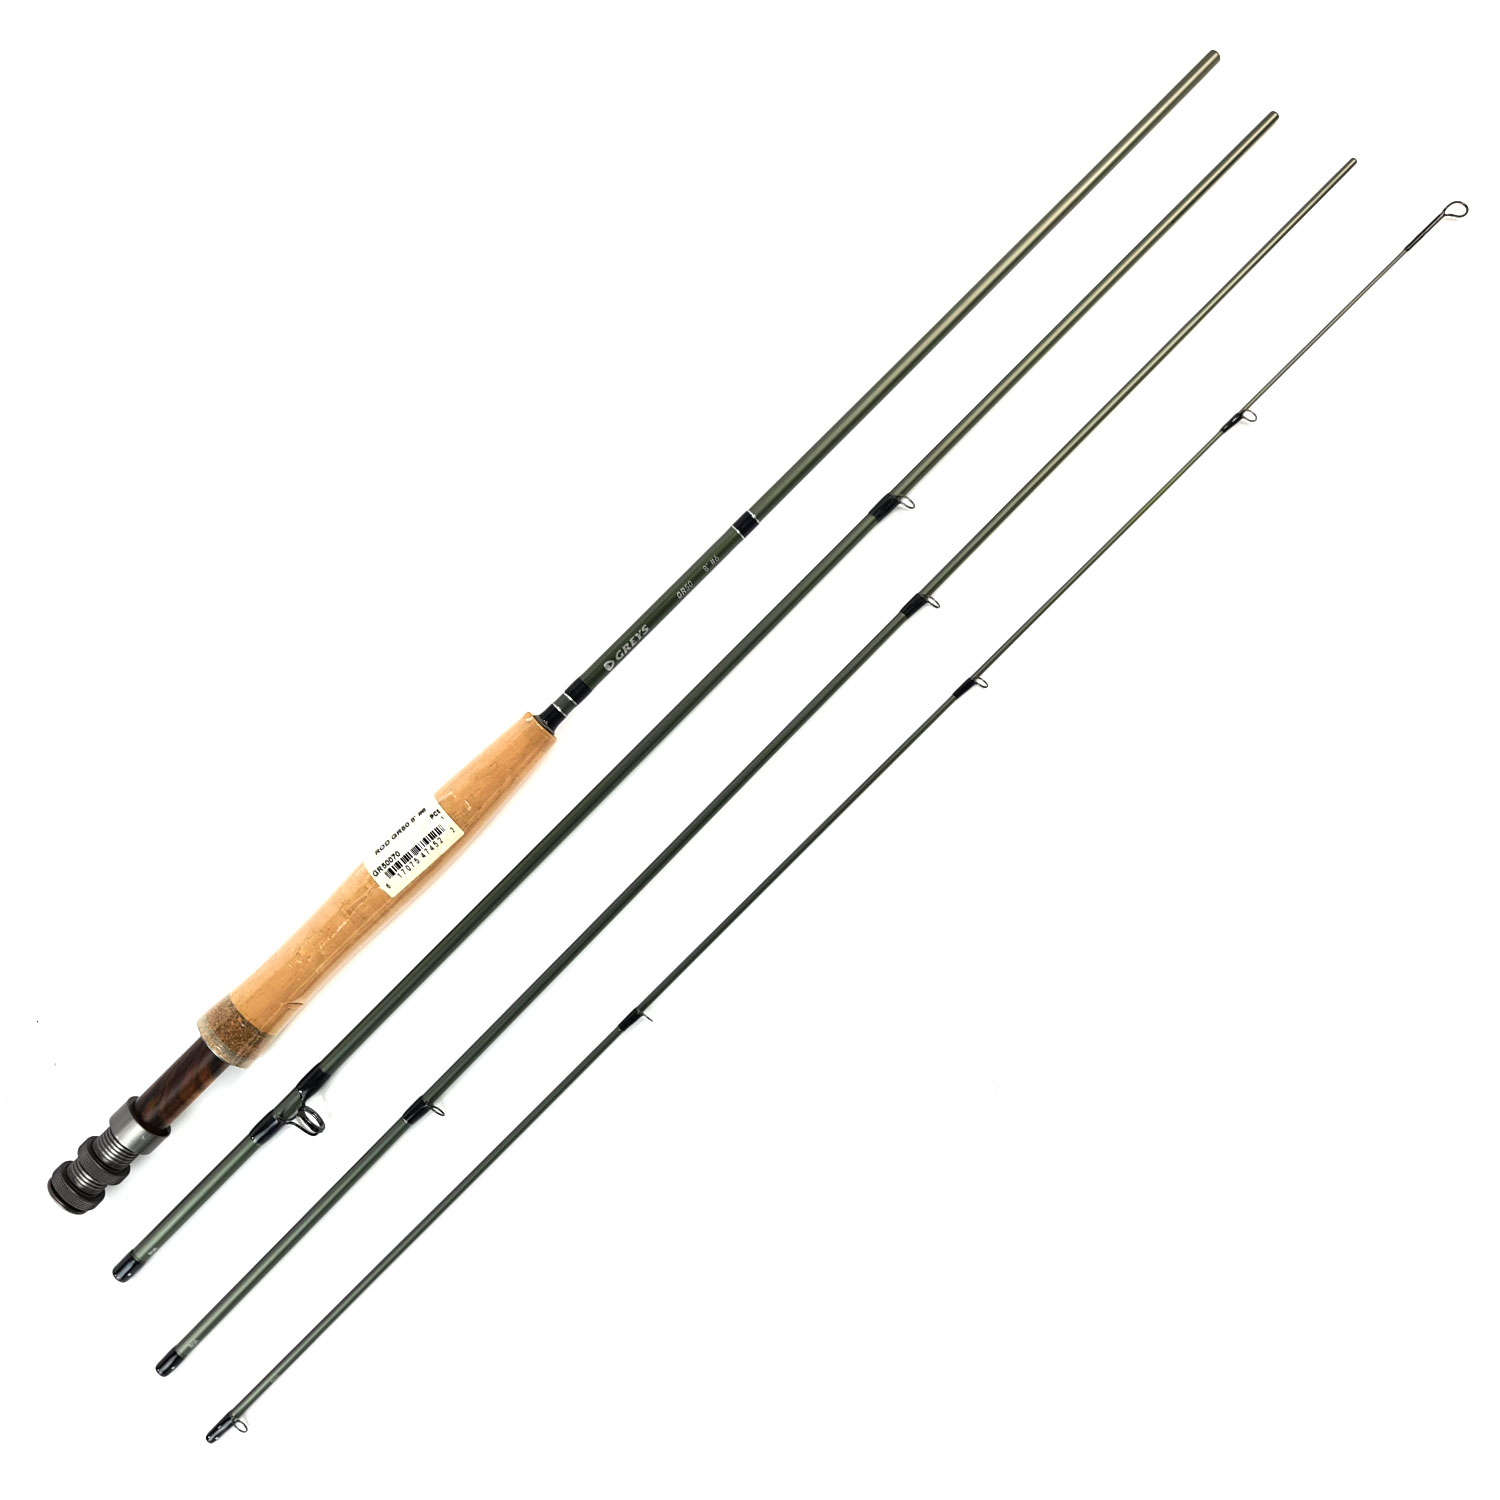 Greys GR50 4pc Fly Rod 6'6" #4 Fishing tackle 